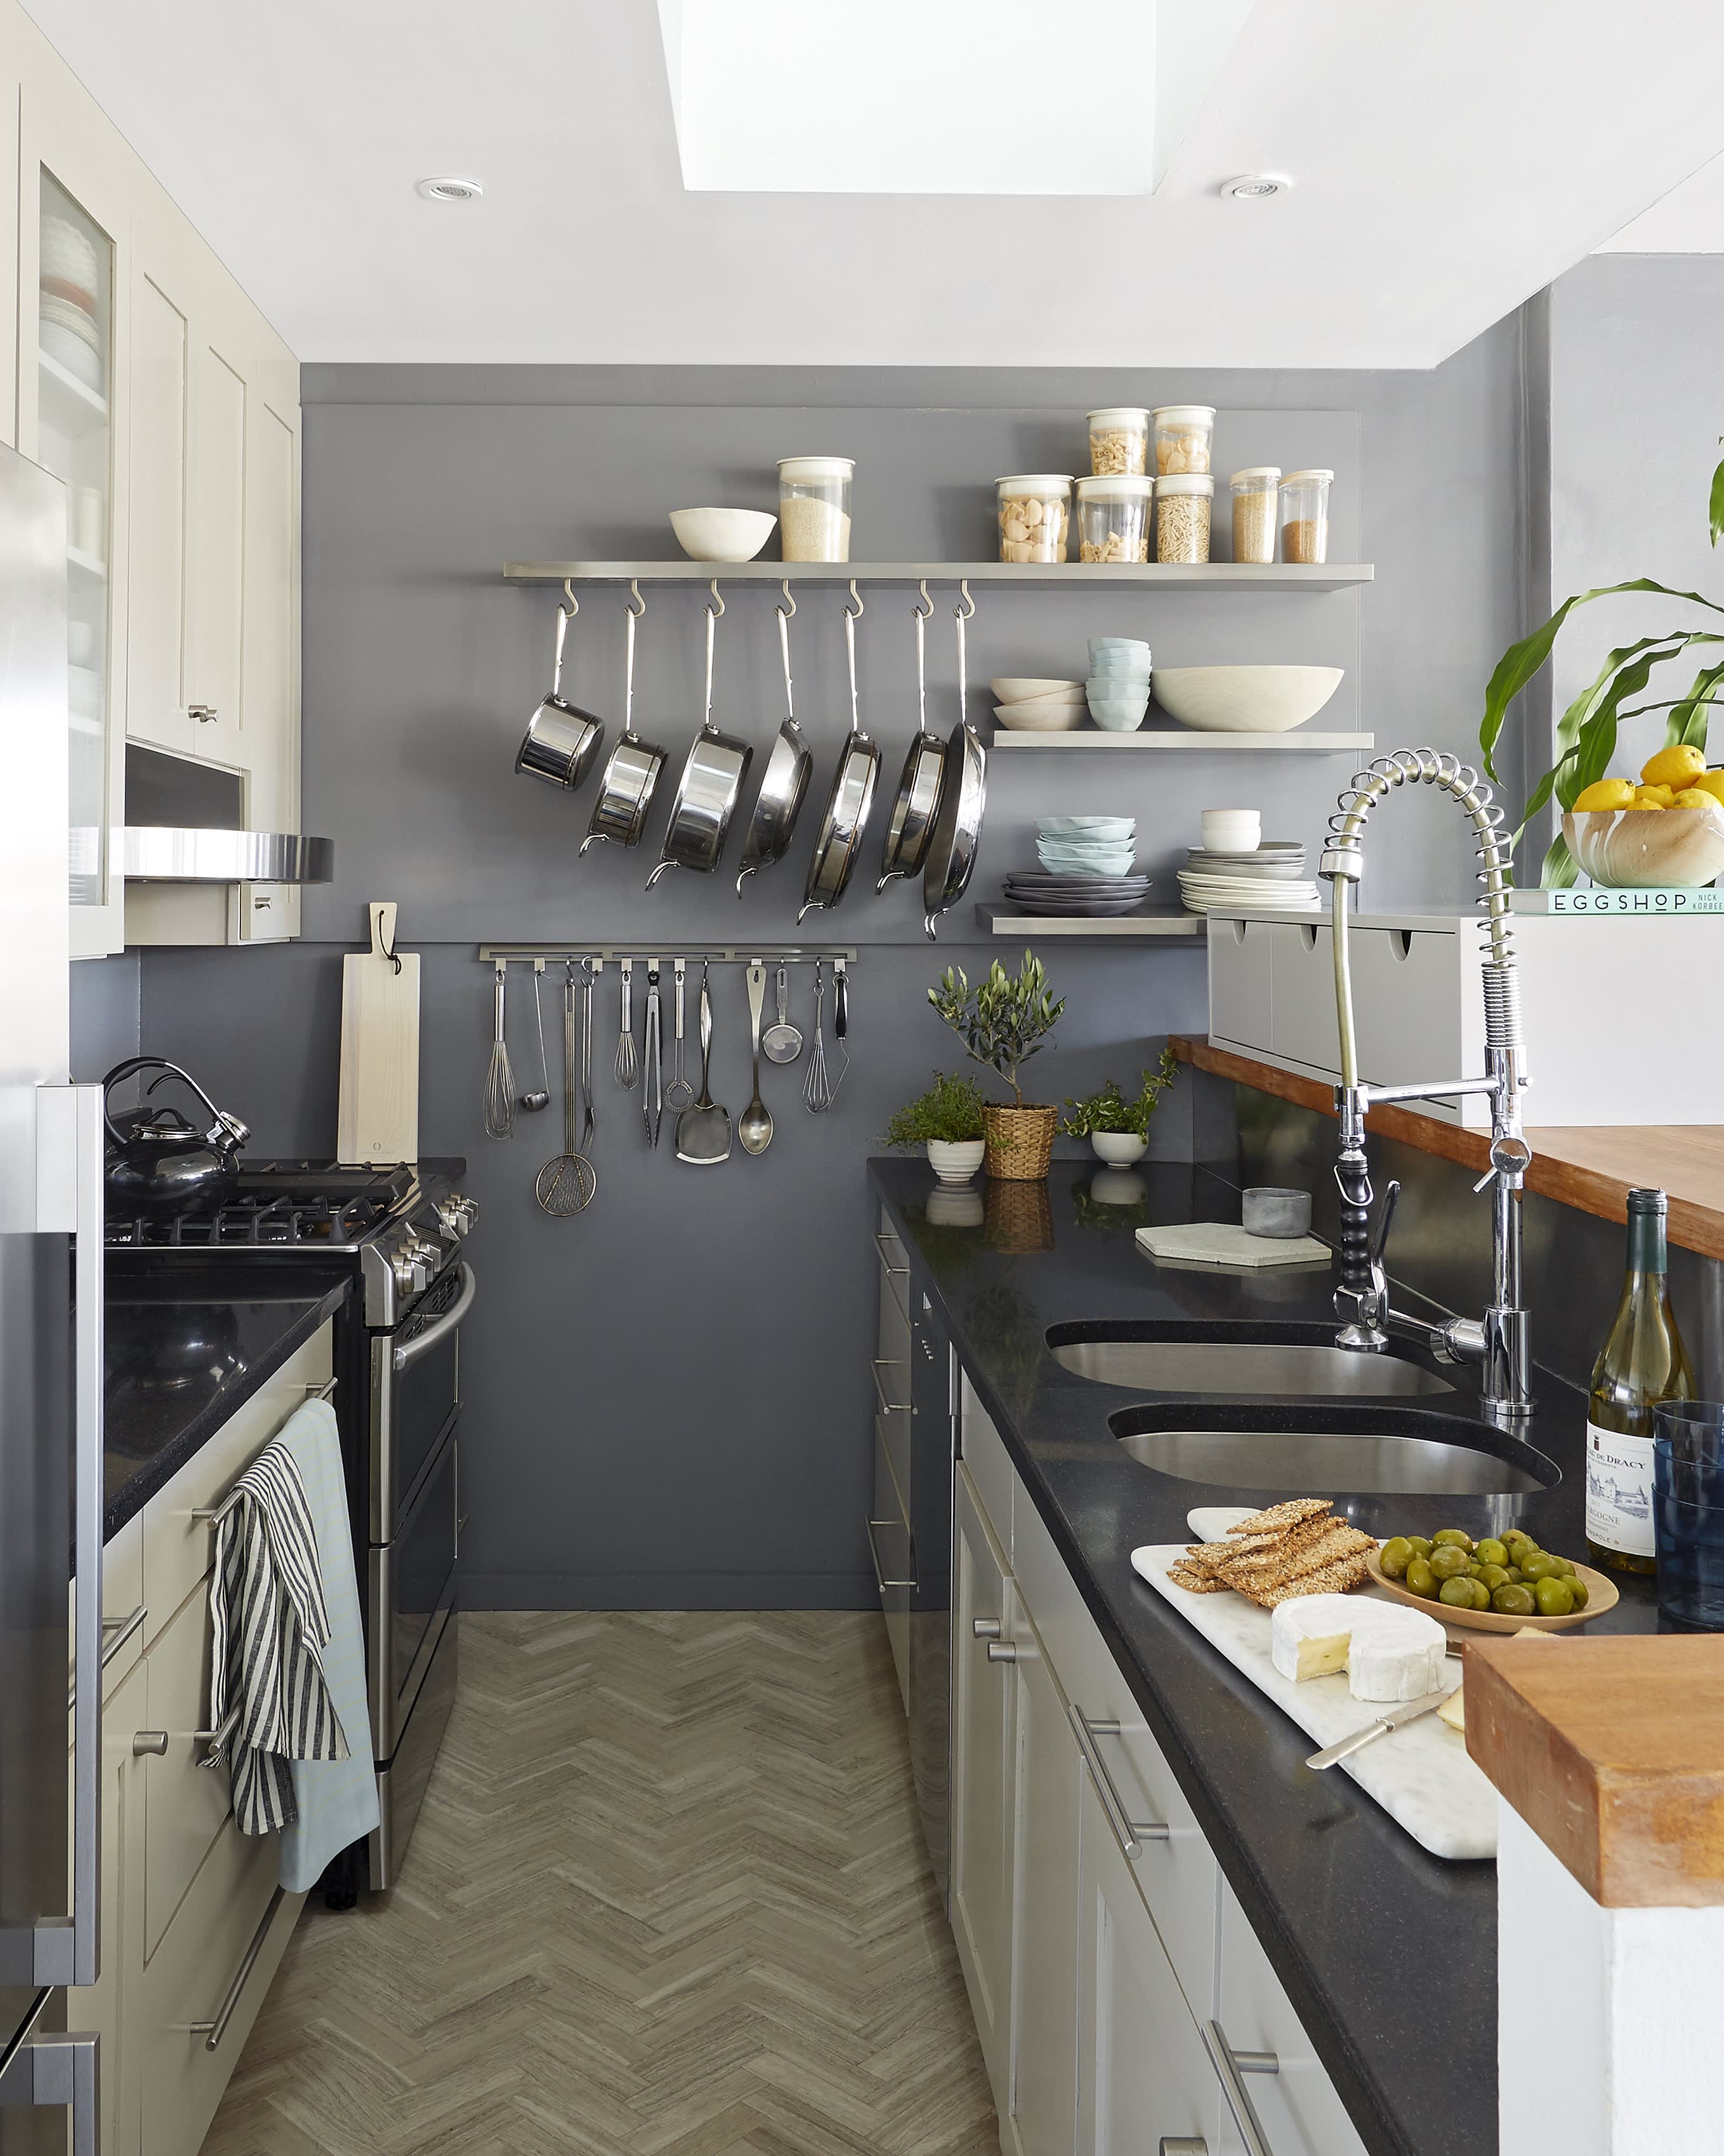 49 small kitchen ideas for even the tiniest of spaces | Ideal Home